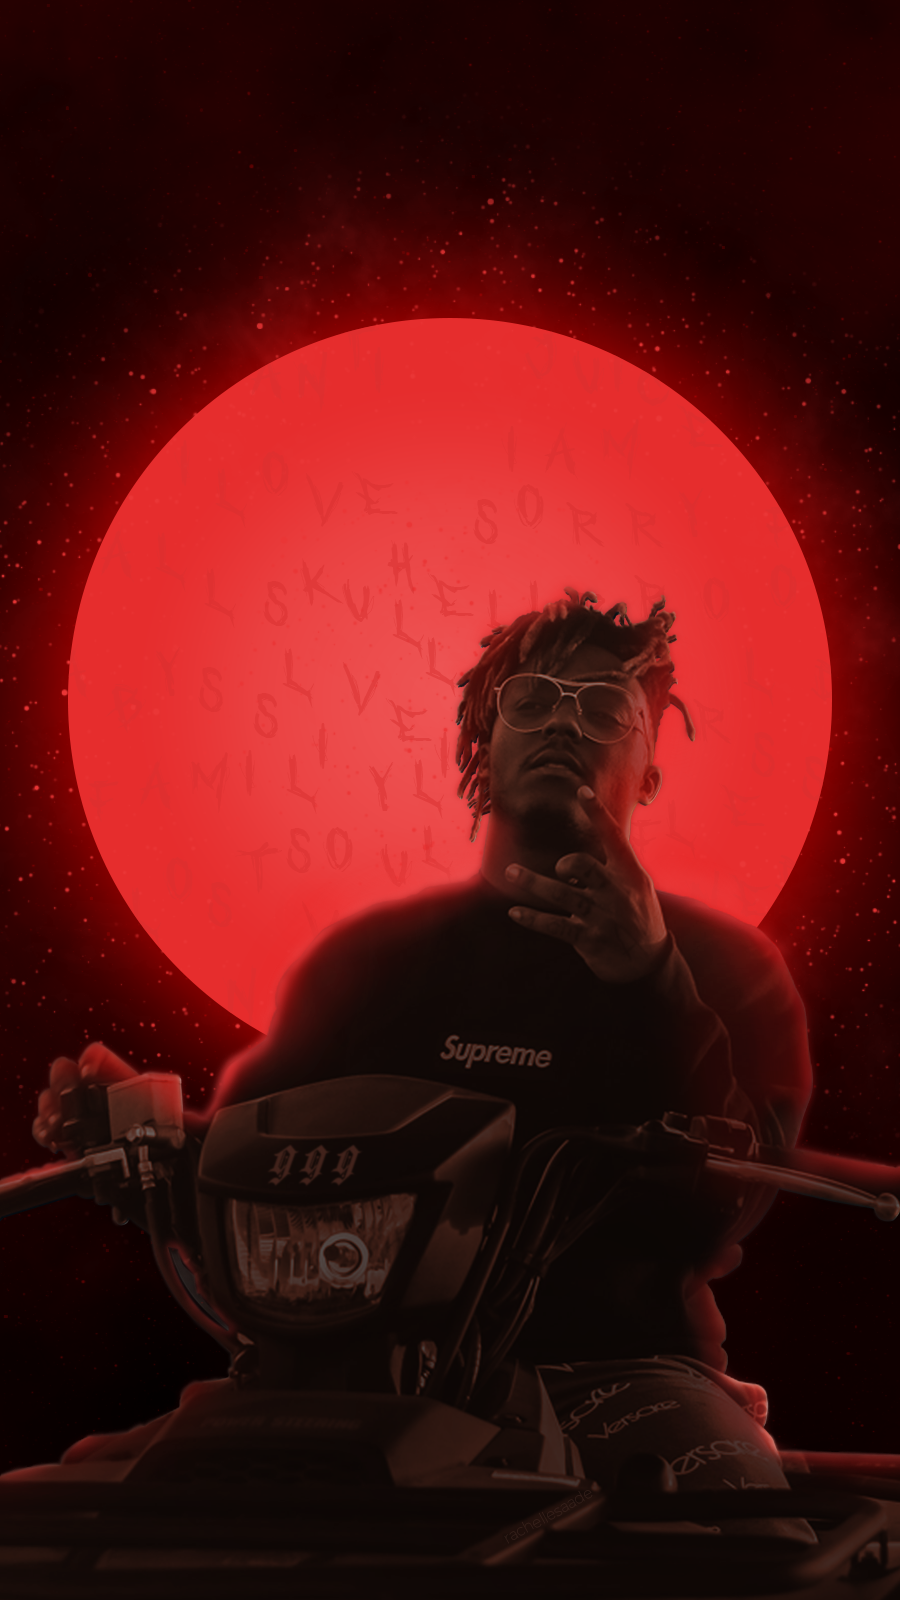 Cool Aesthetic Juice Wrld Wallpapers Wallpapers